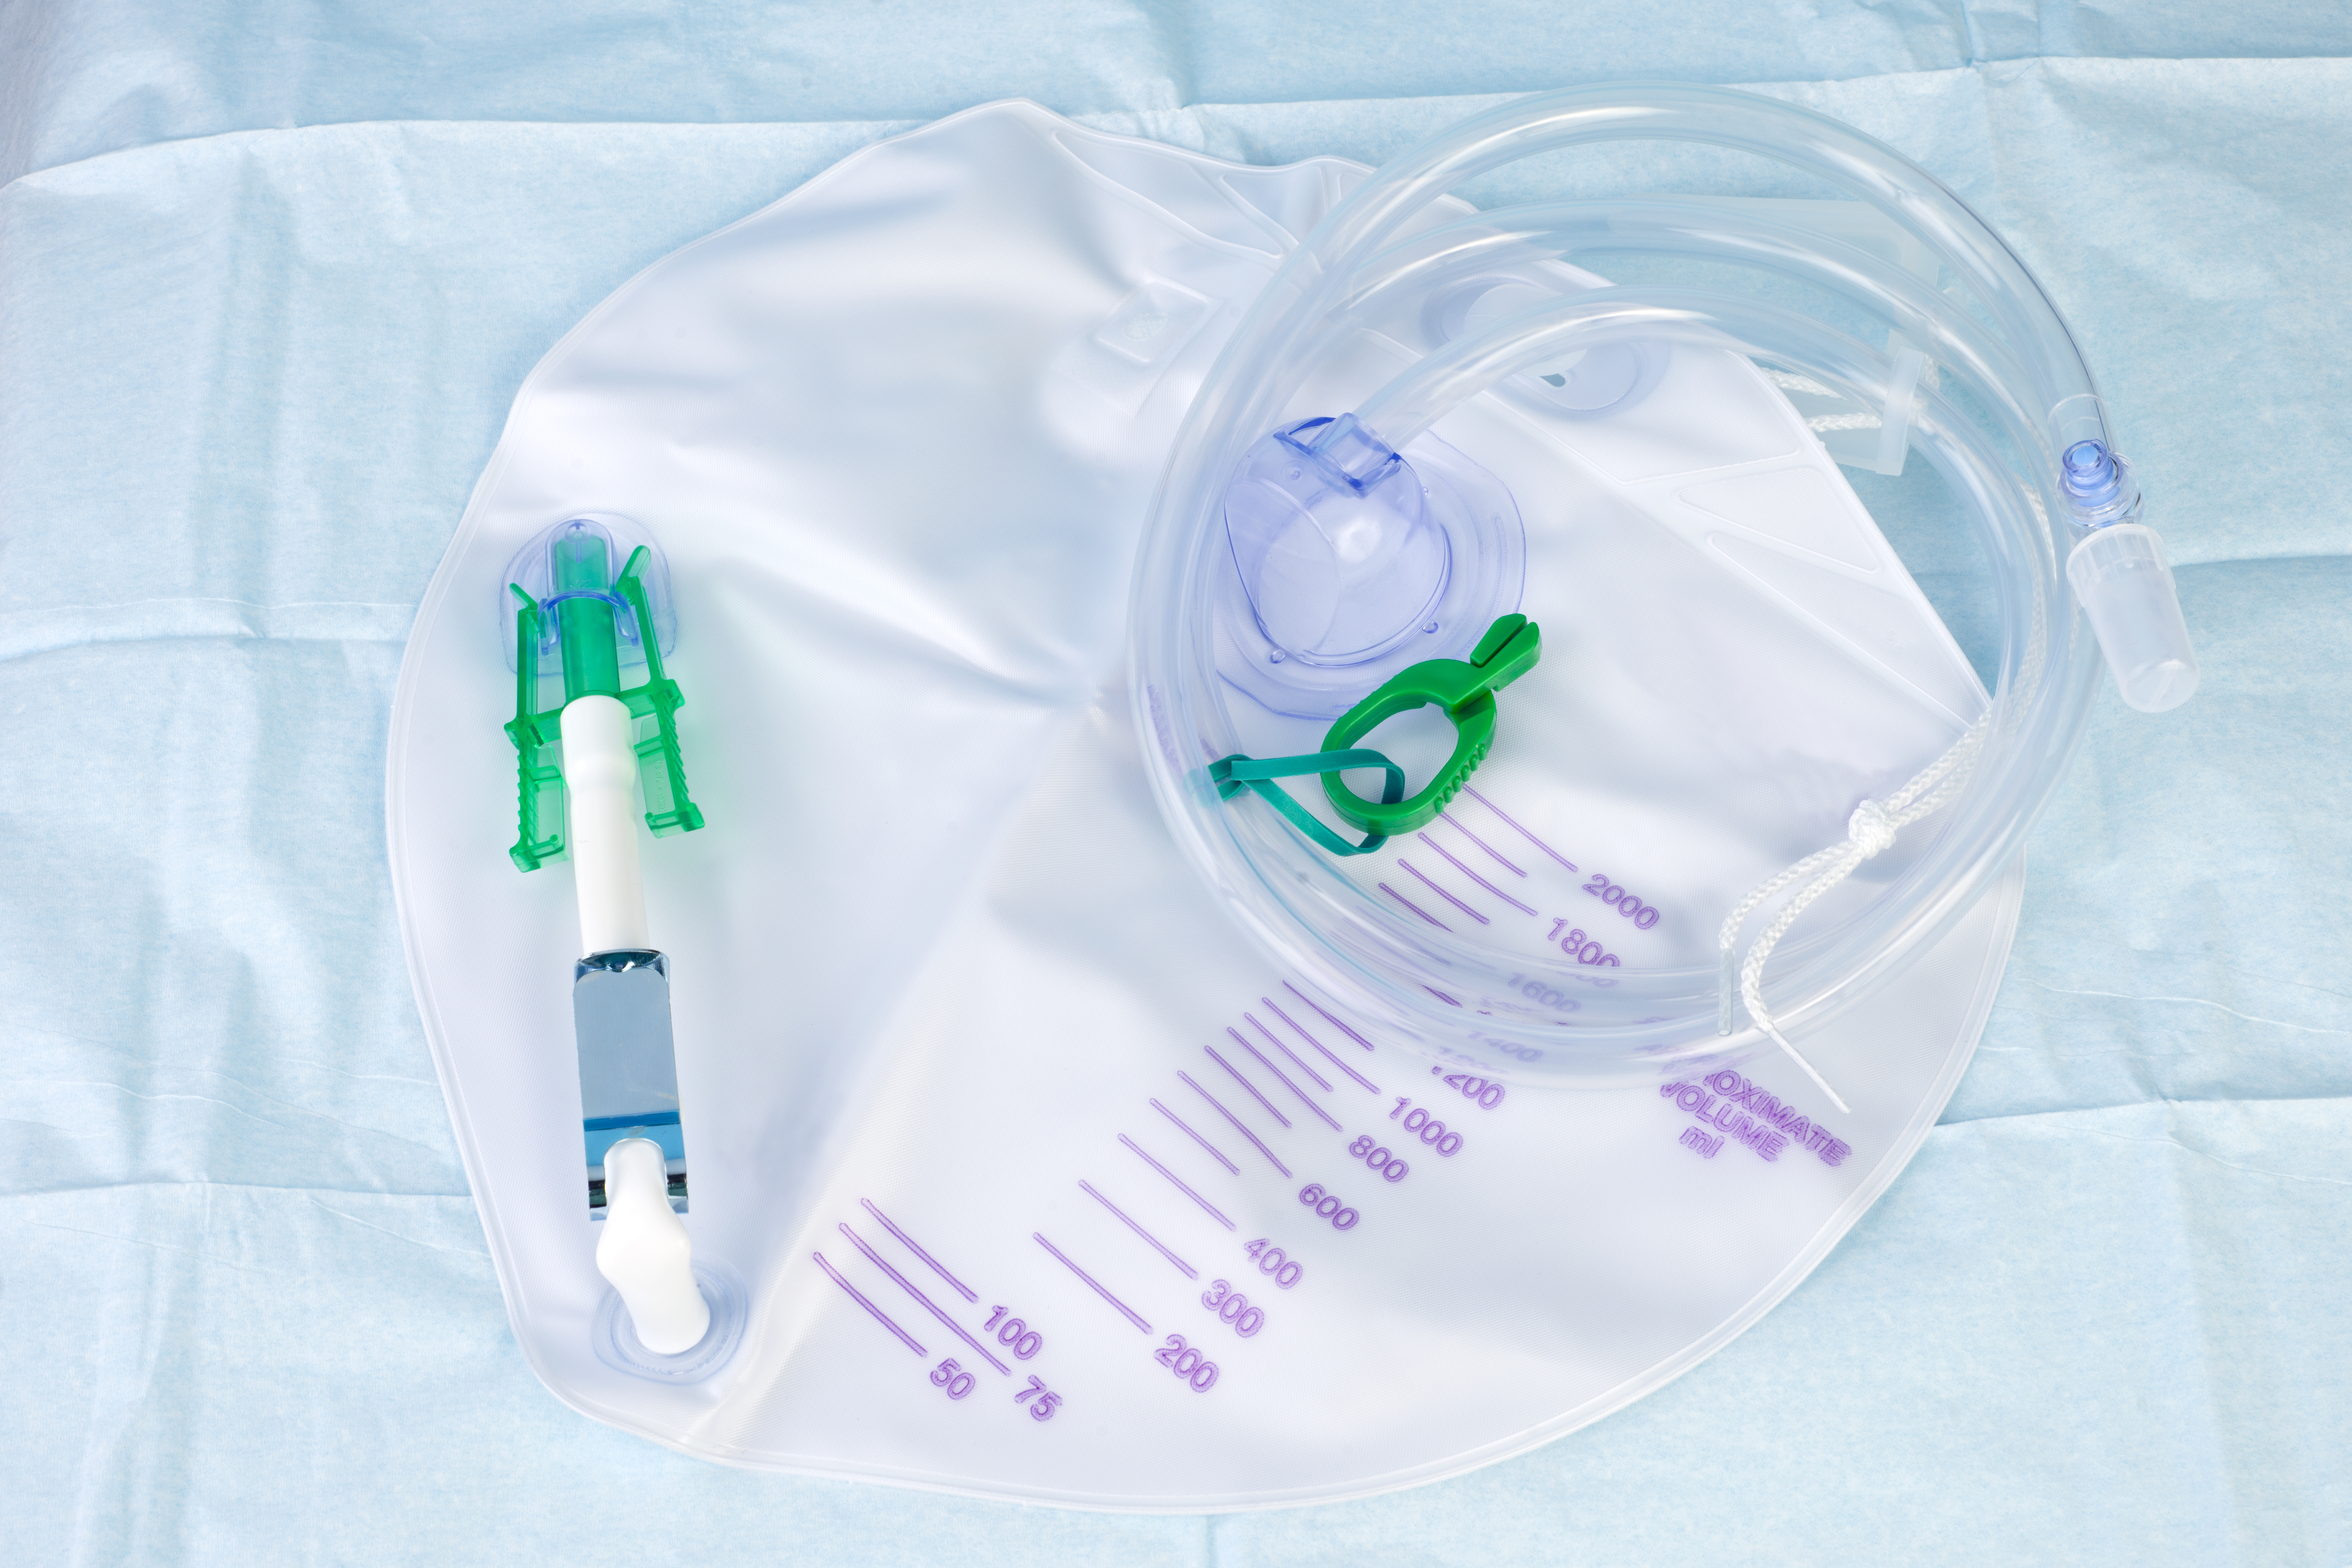 Optimizing catheter care by CNAs and other non-clinicians